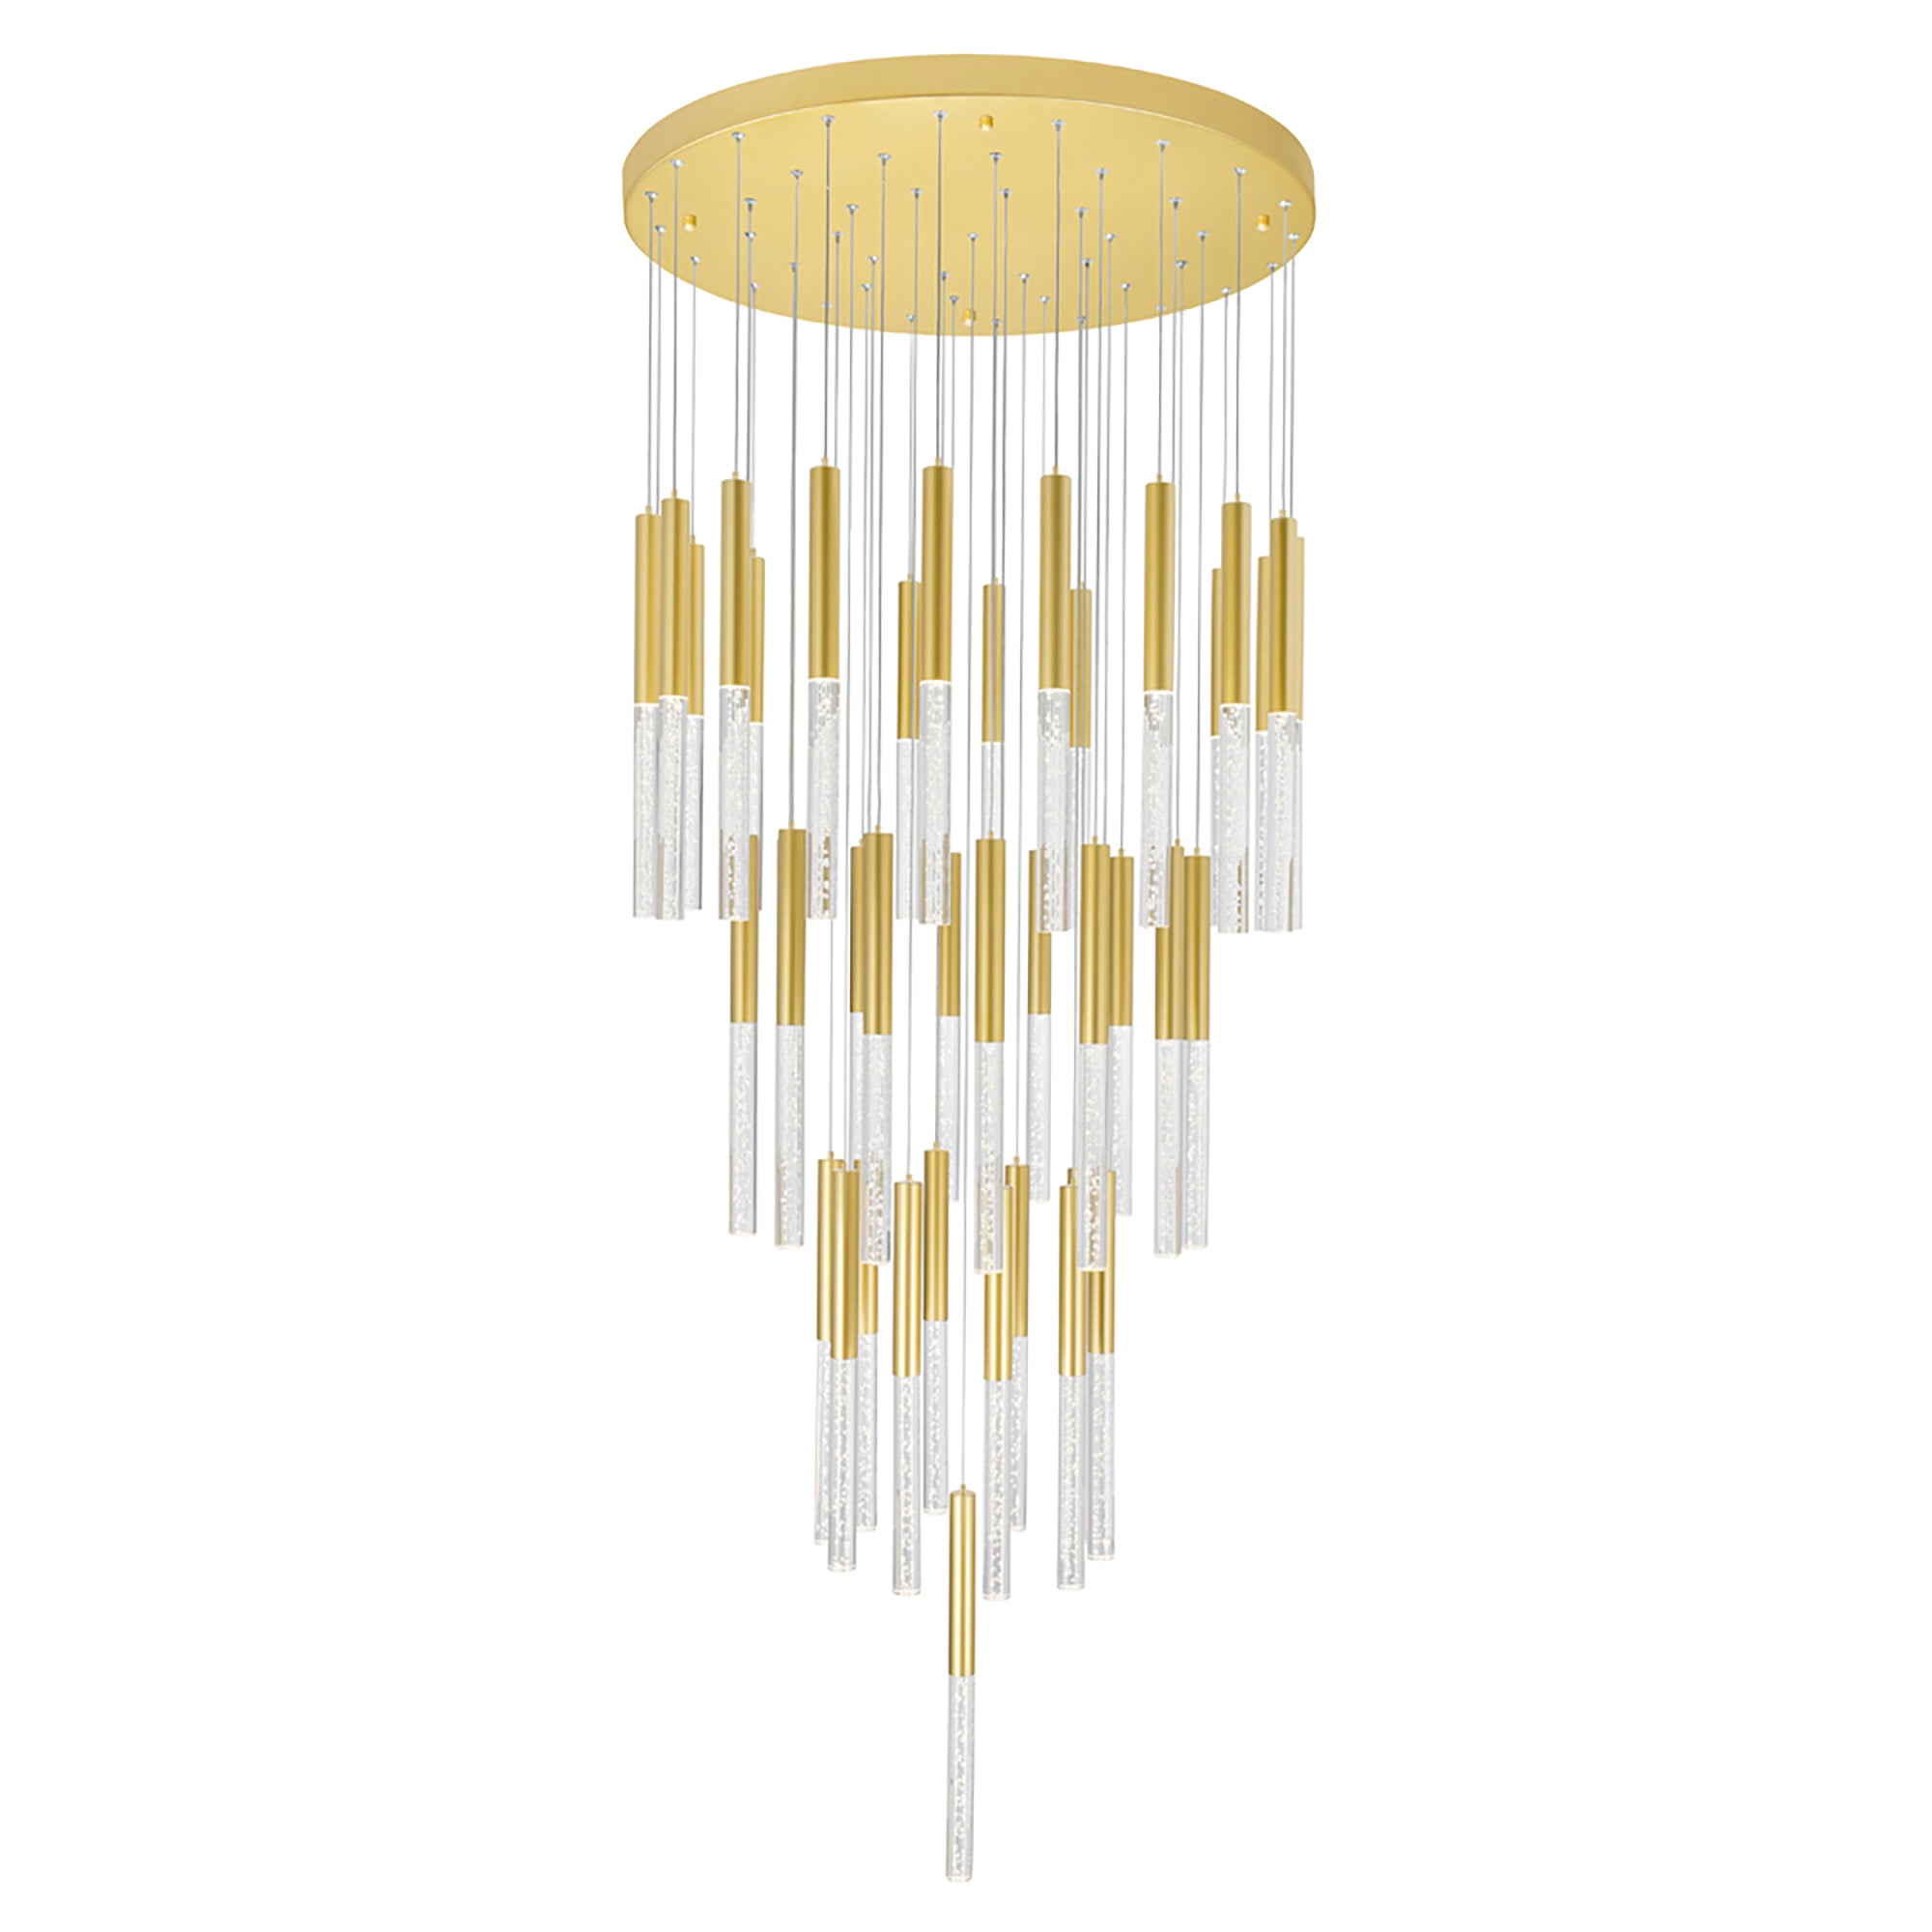 Dragonswatch LED Integrated Chandelier